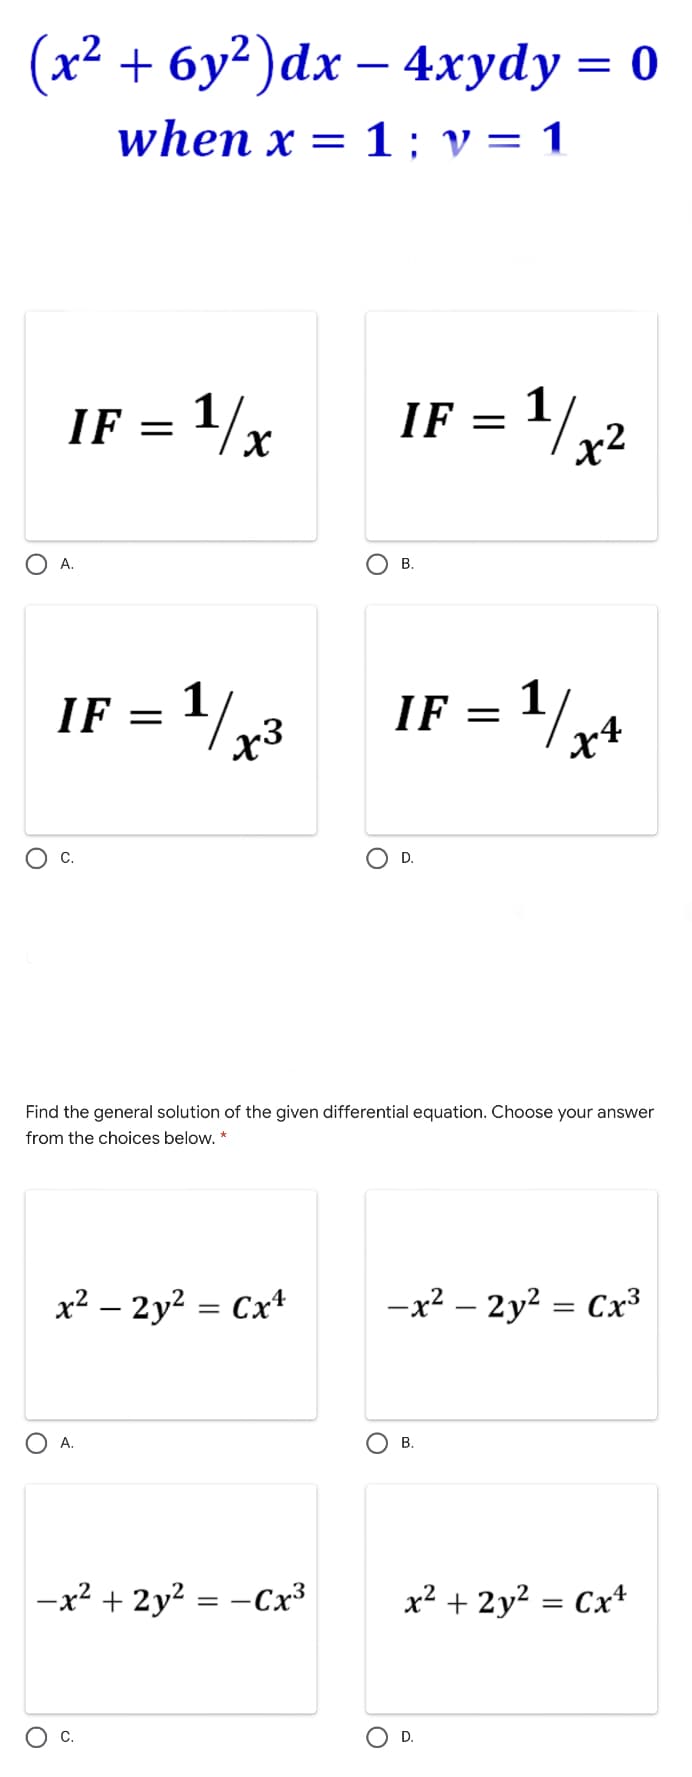 (х? + бу?) dх — 4хуdy %3D0
when x = 1; v = 1
IF = 1/x
1/2
IF
x2
A.
В.
IF = 1/.
23
IF = '/,4
O c.
D.
Find the general solution of the given differential equation. Choose your answer
from the choices below. *
x² – 2y? = Cxt
-x? – 2y? = Cx3
O A.
O B.
-x² + 2y? = -Cx³
x2 + 2y? = Cx+
C.
D.
